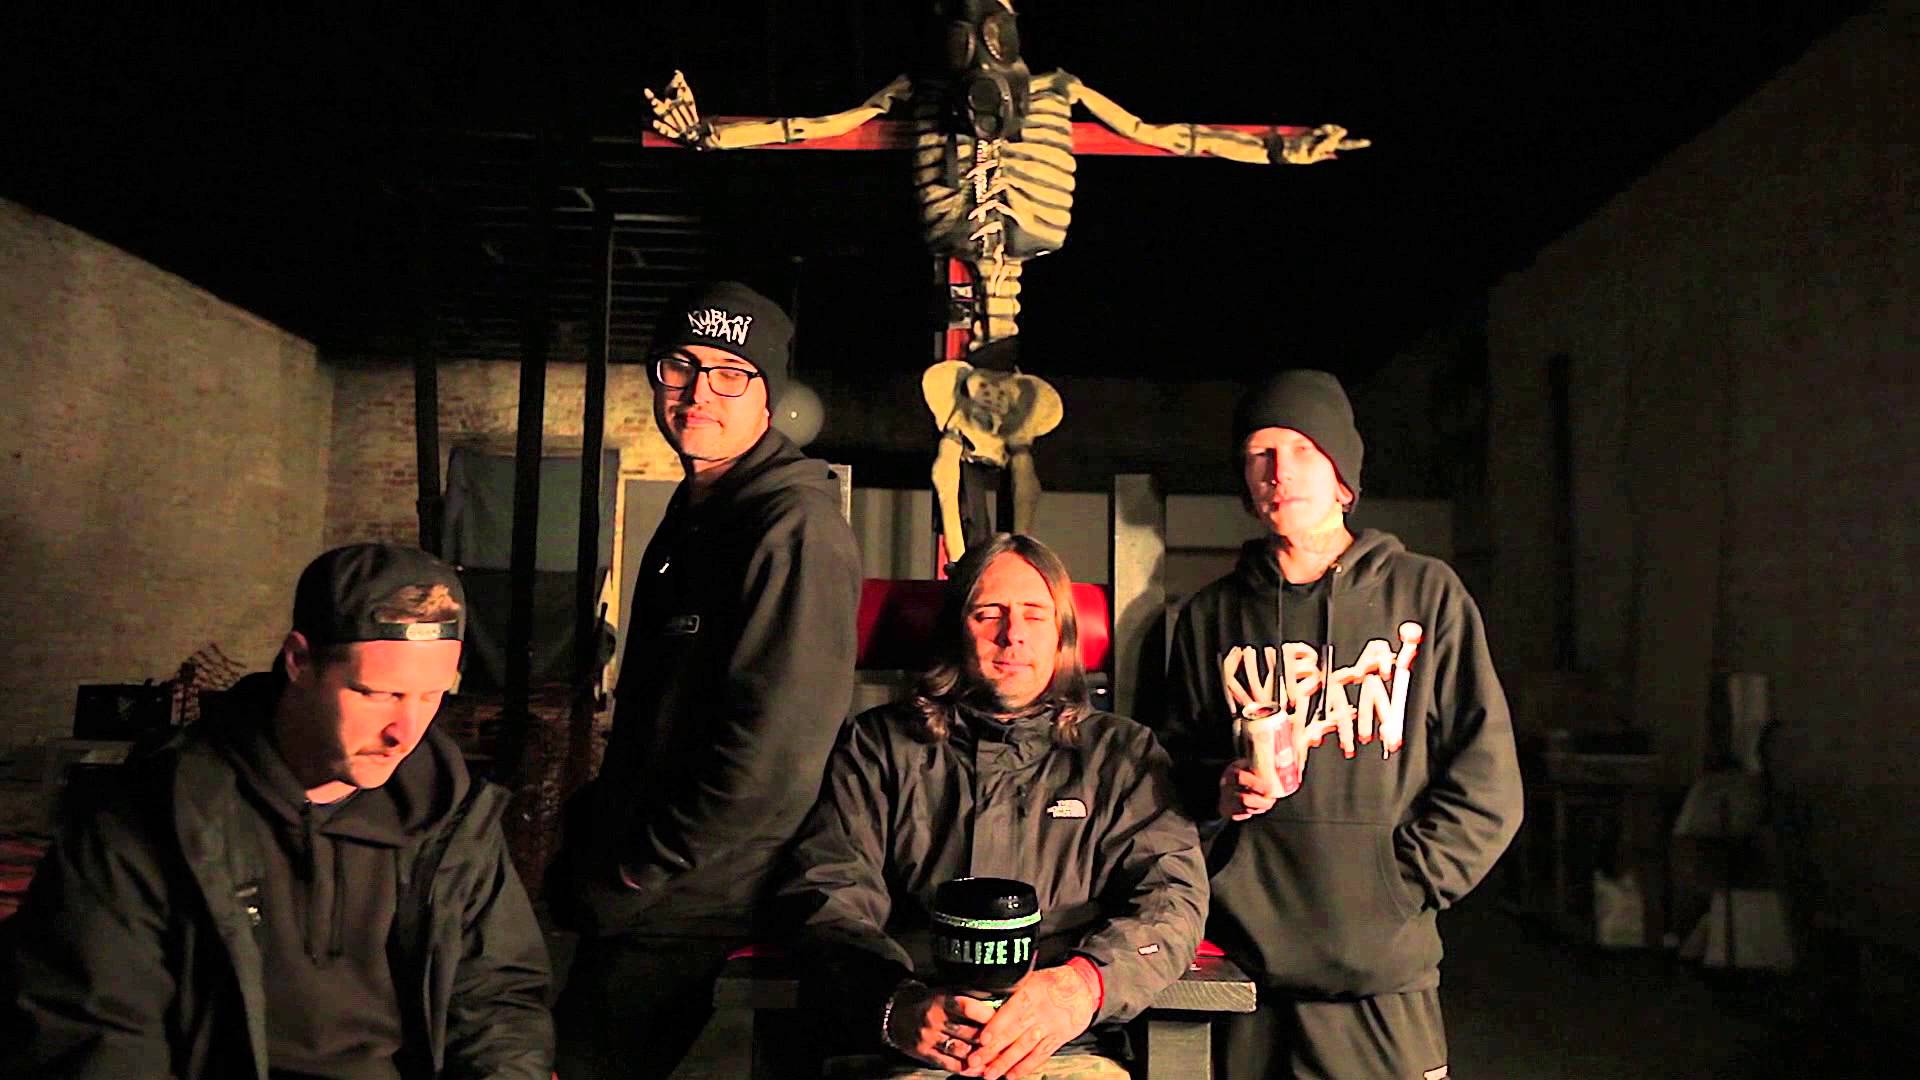 THY ART IS MURDER Christmas message from the band